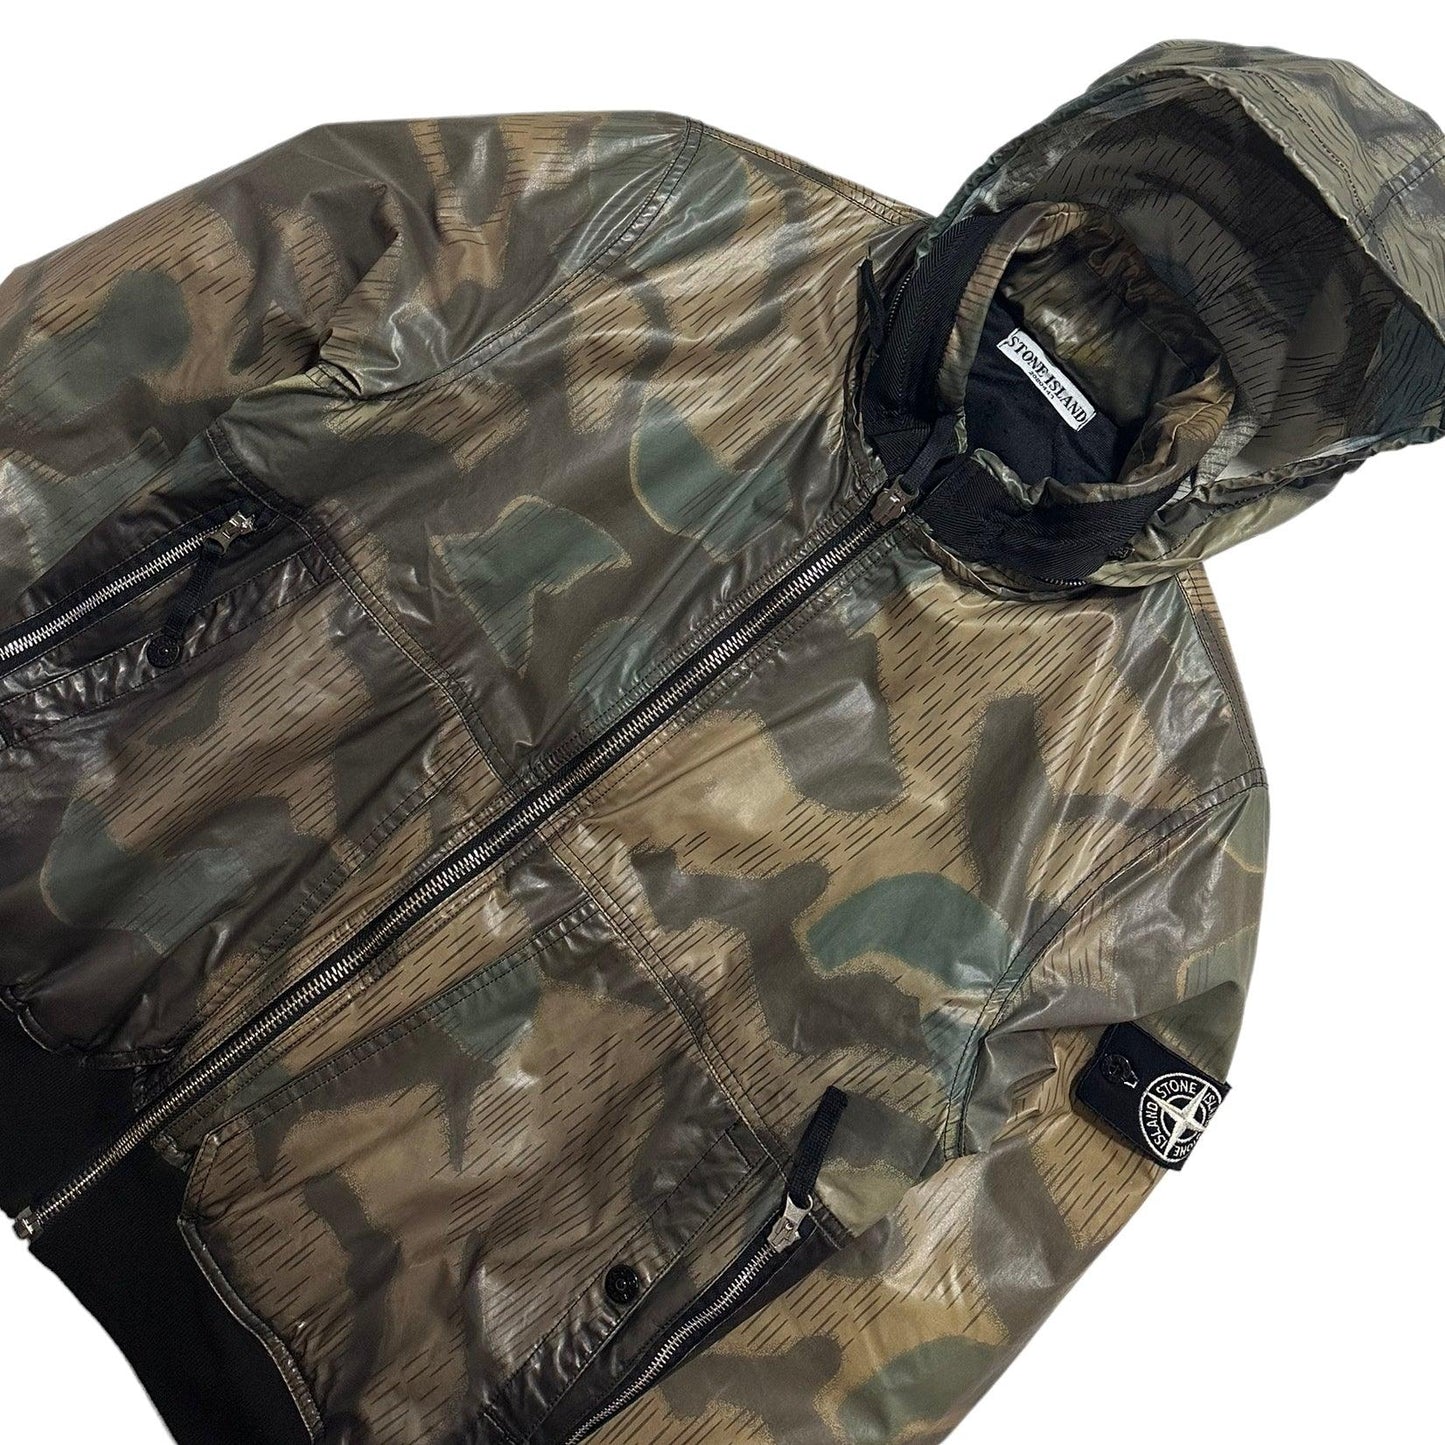 Stone Island Camouflage Ice Jacket with Packable Hood - Known Source